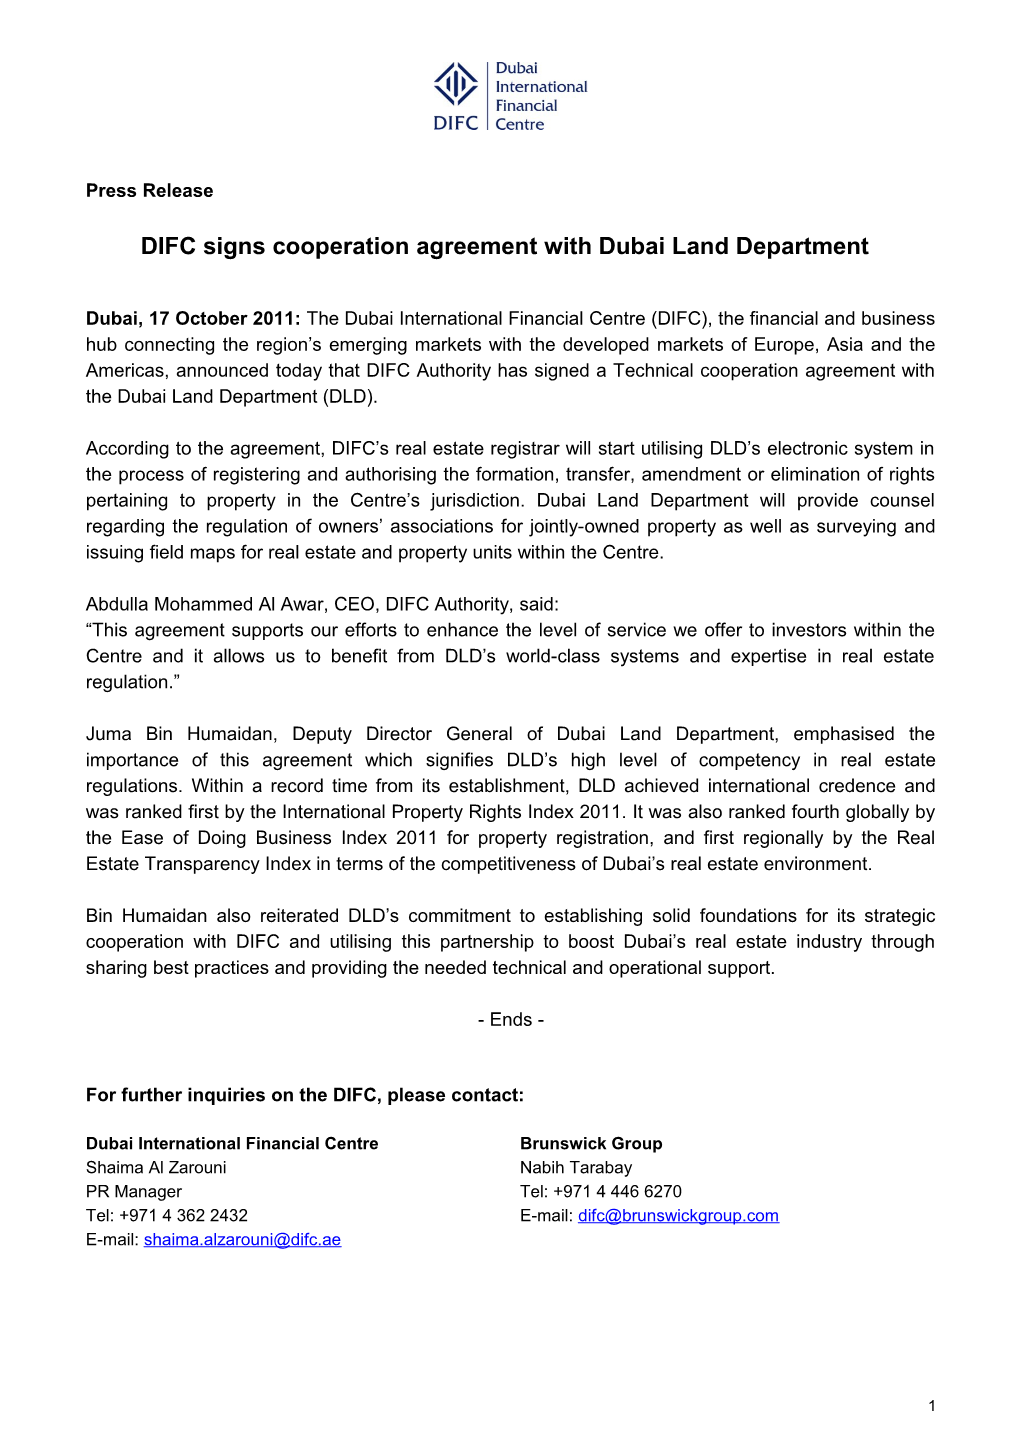 DIFC Signs Cooperation Agreement with Dubai Land Department